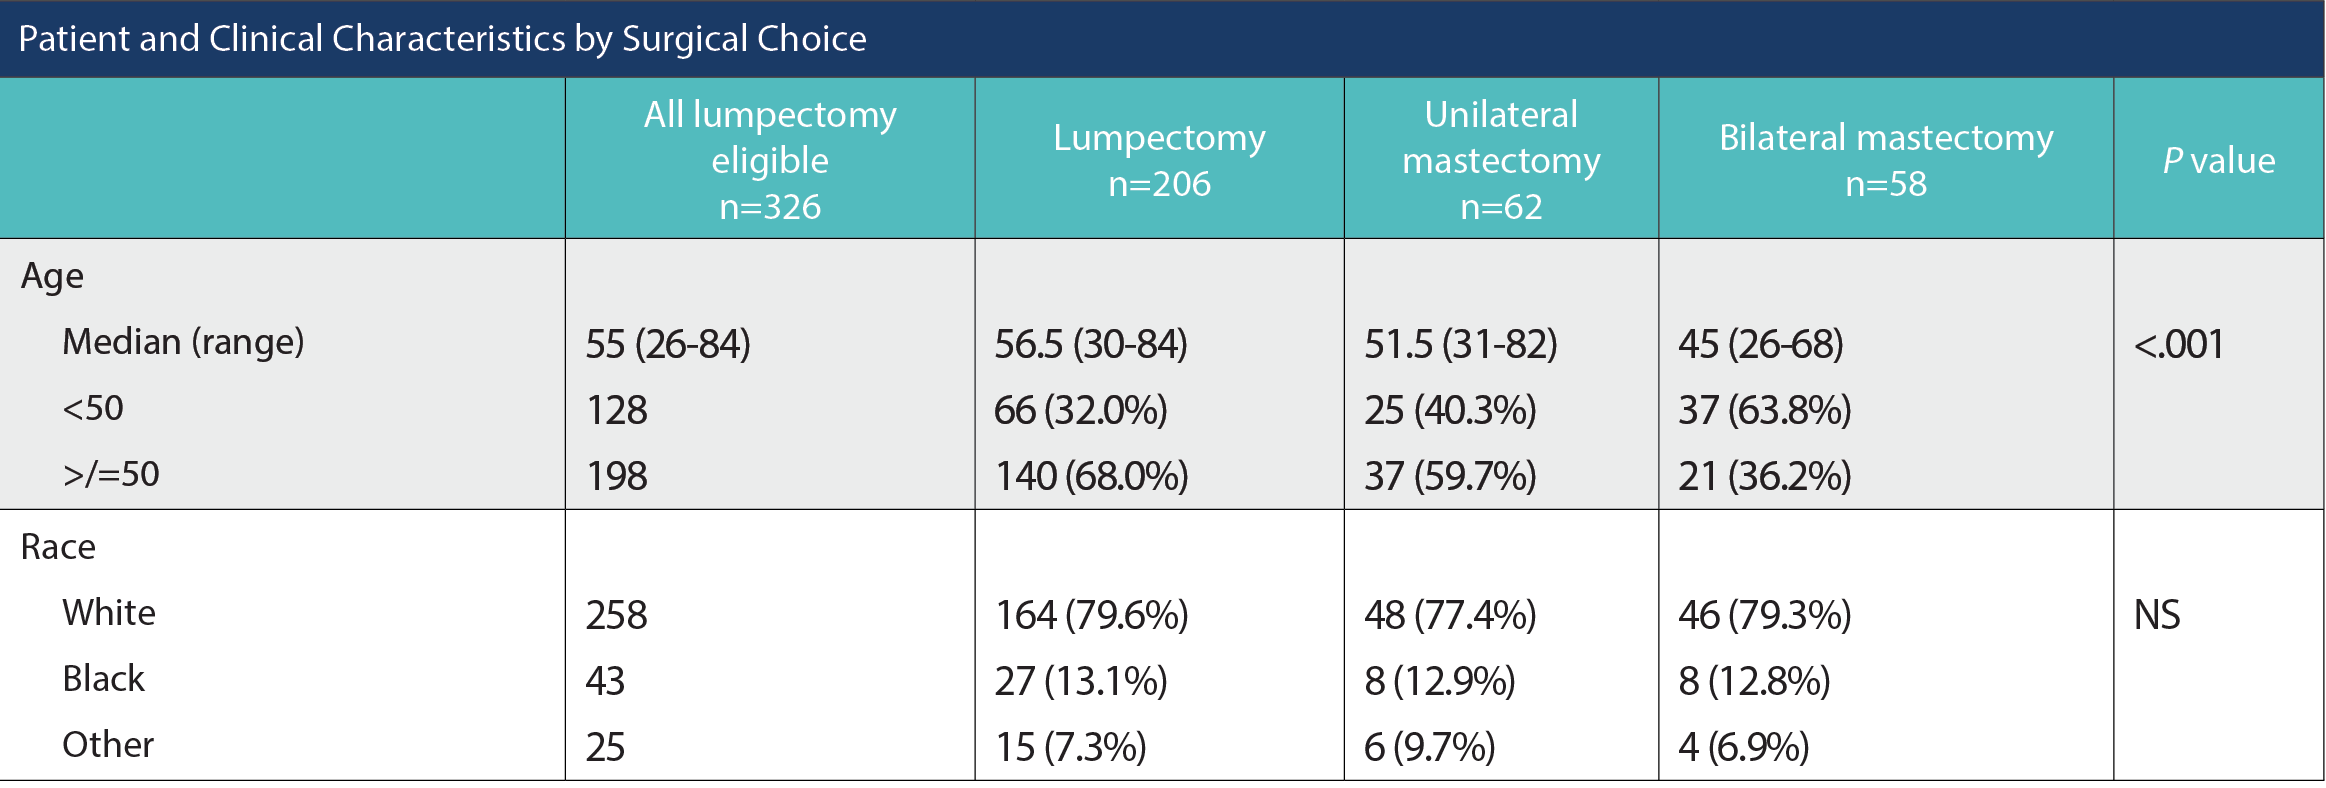 Patient and Clinical Characteristics by Surgical Choice